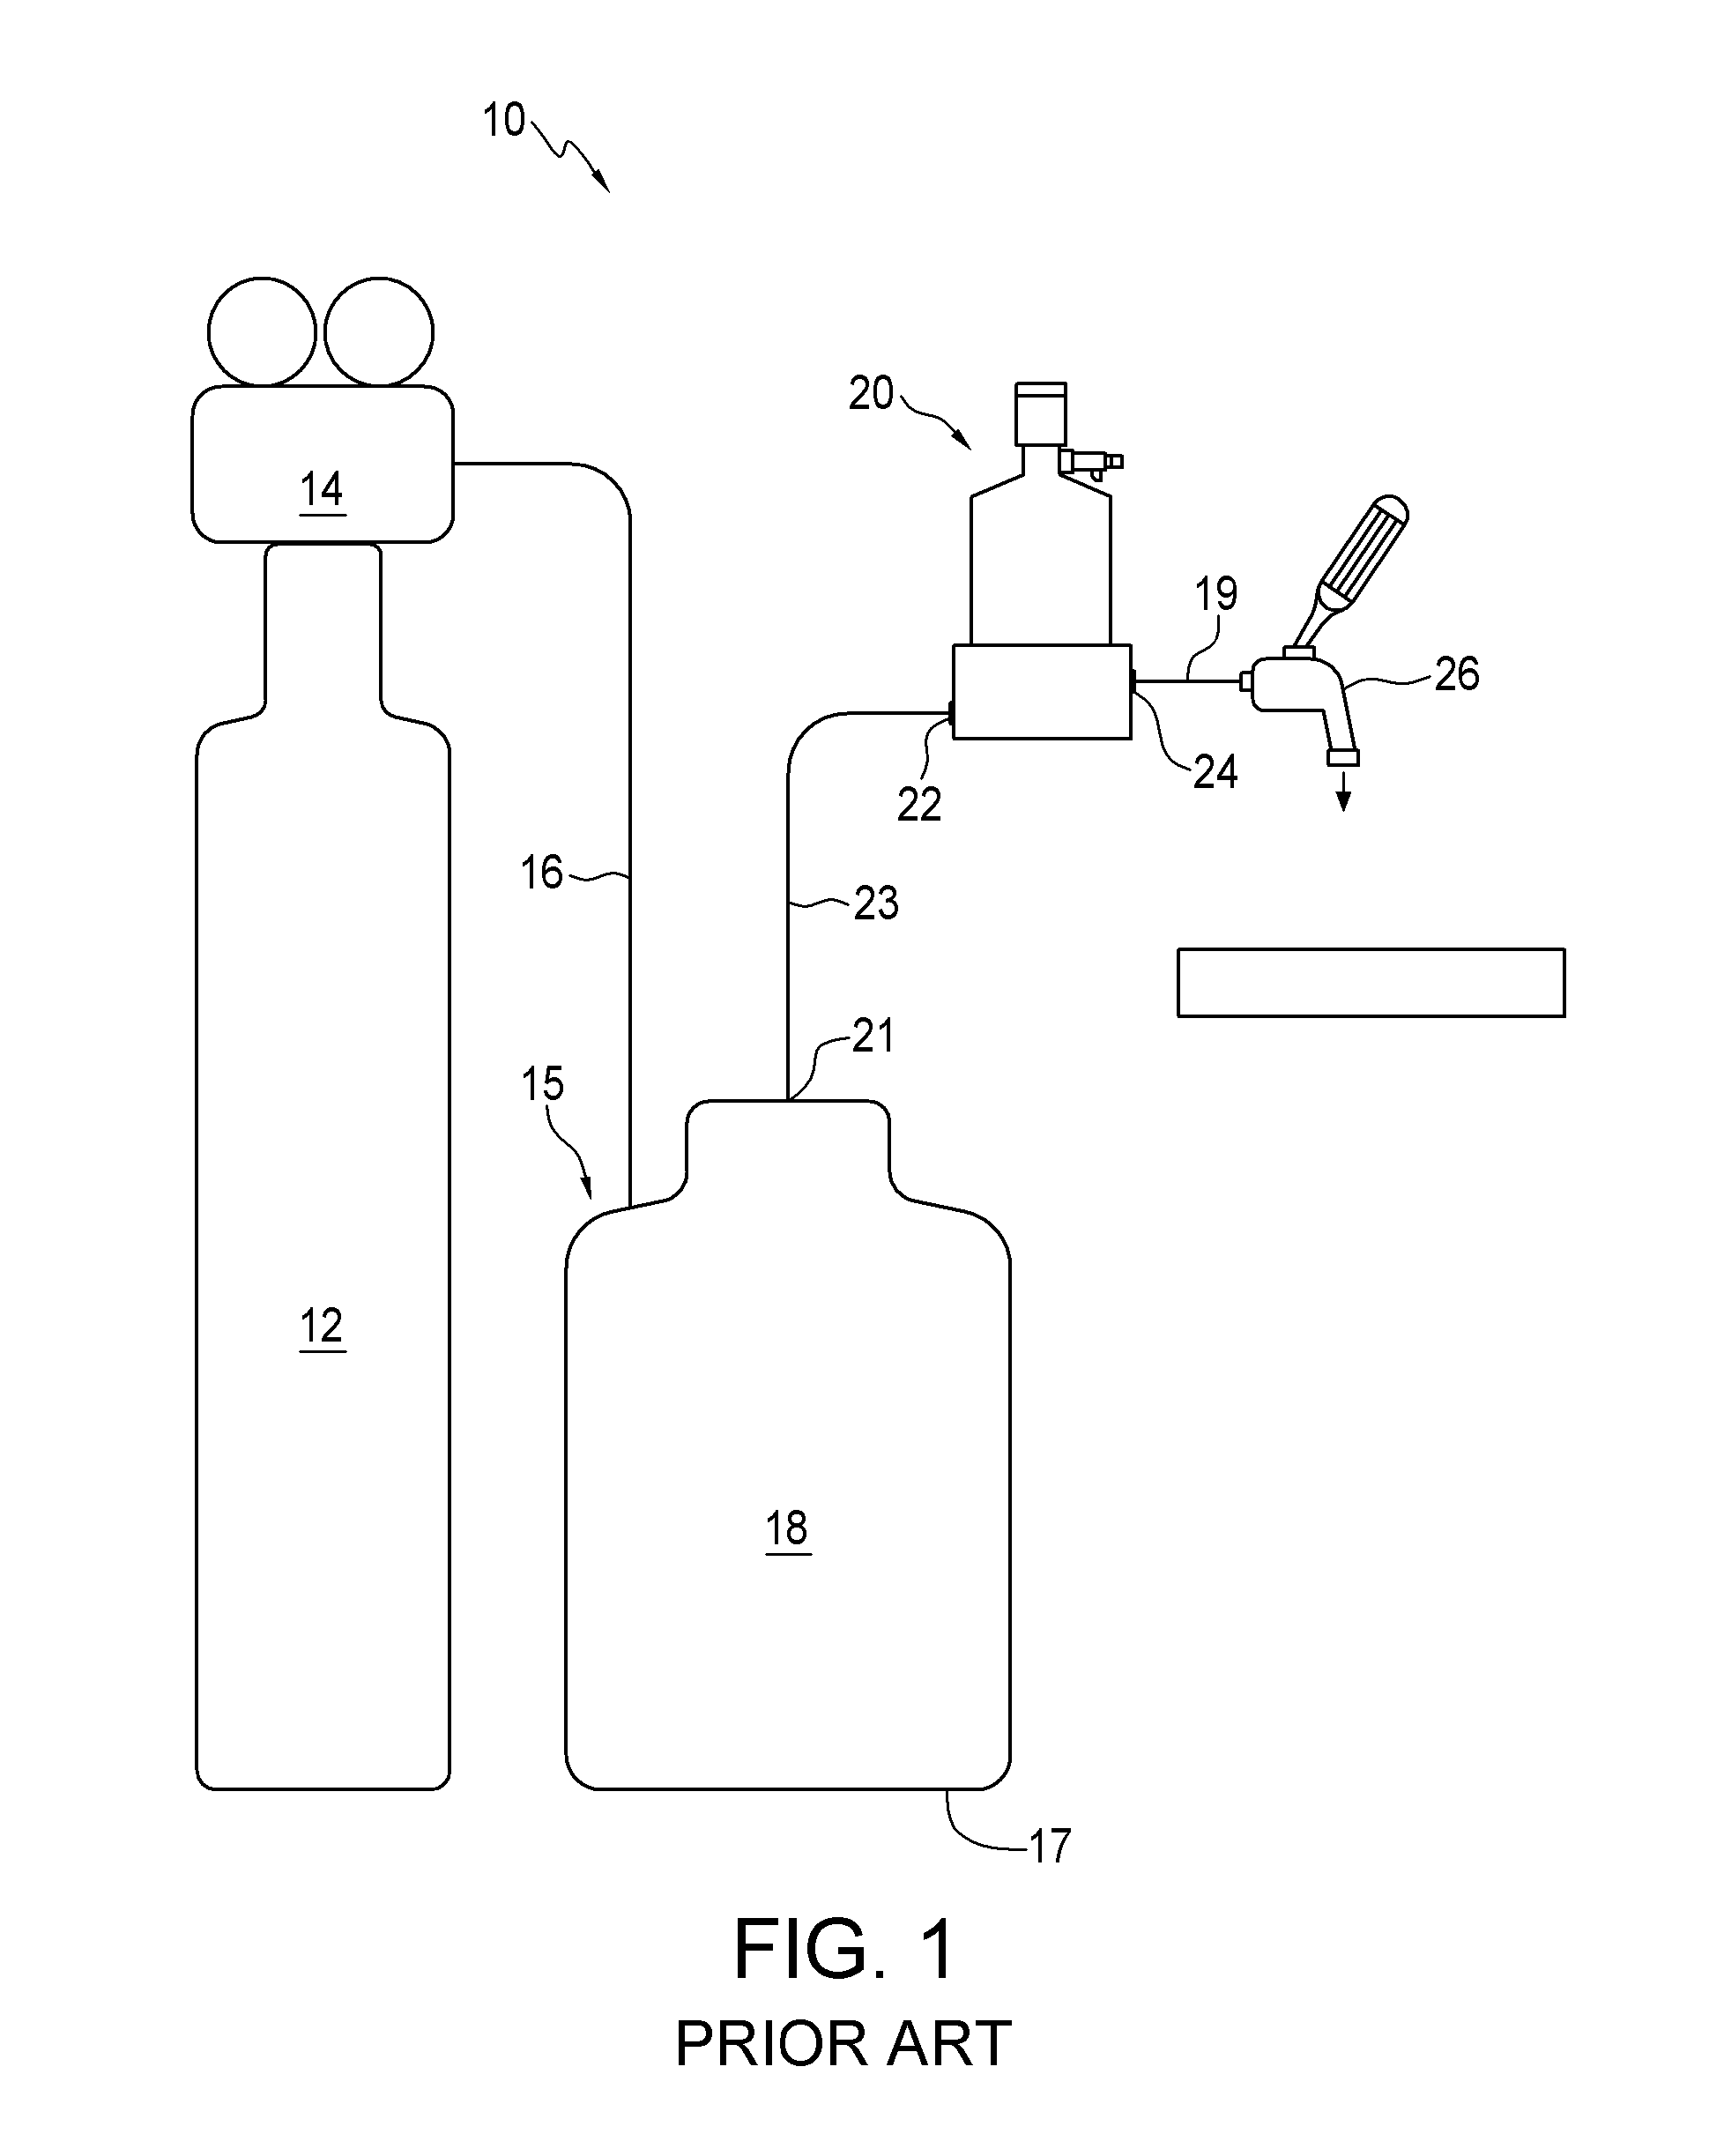 Valve apparatus for selectively dispensing liquid from a plurality of sources